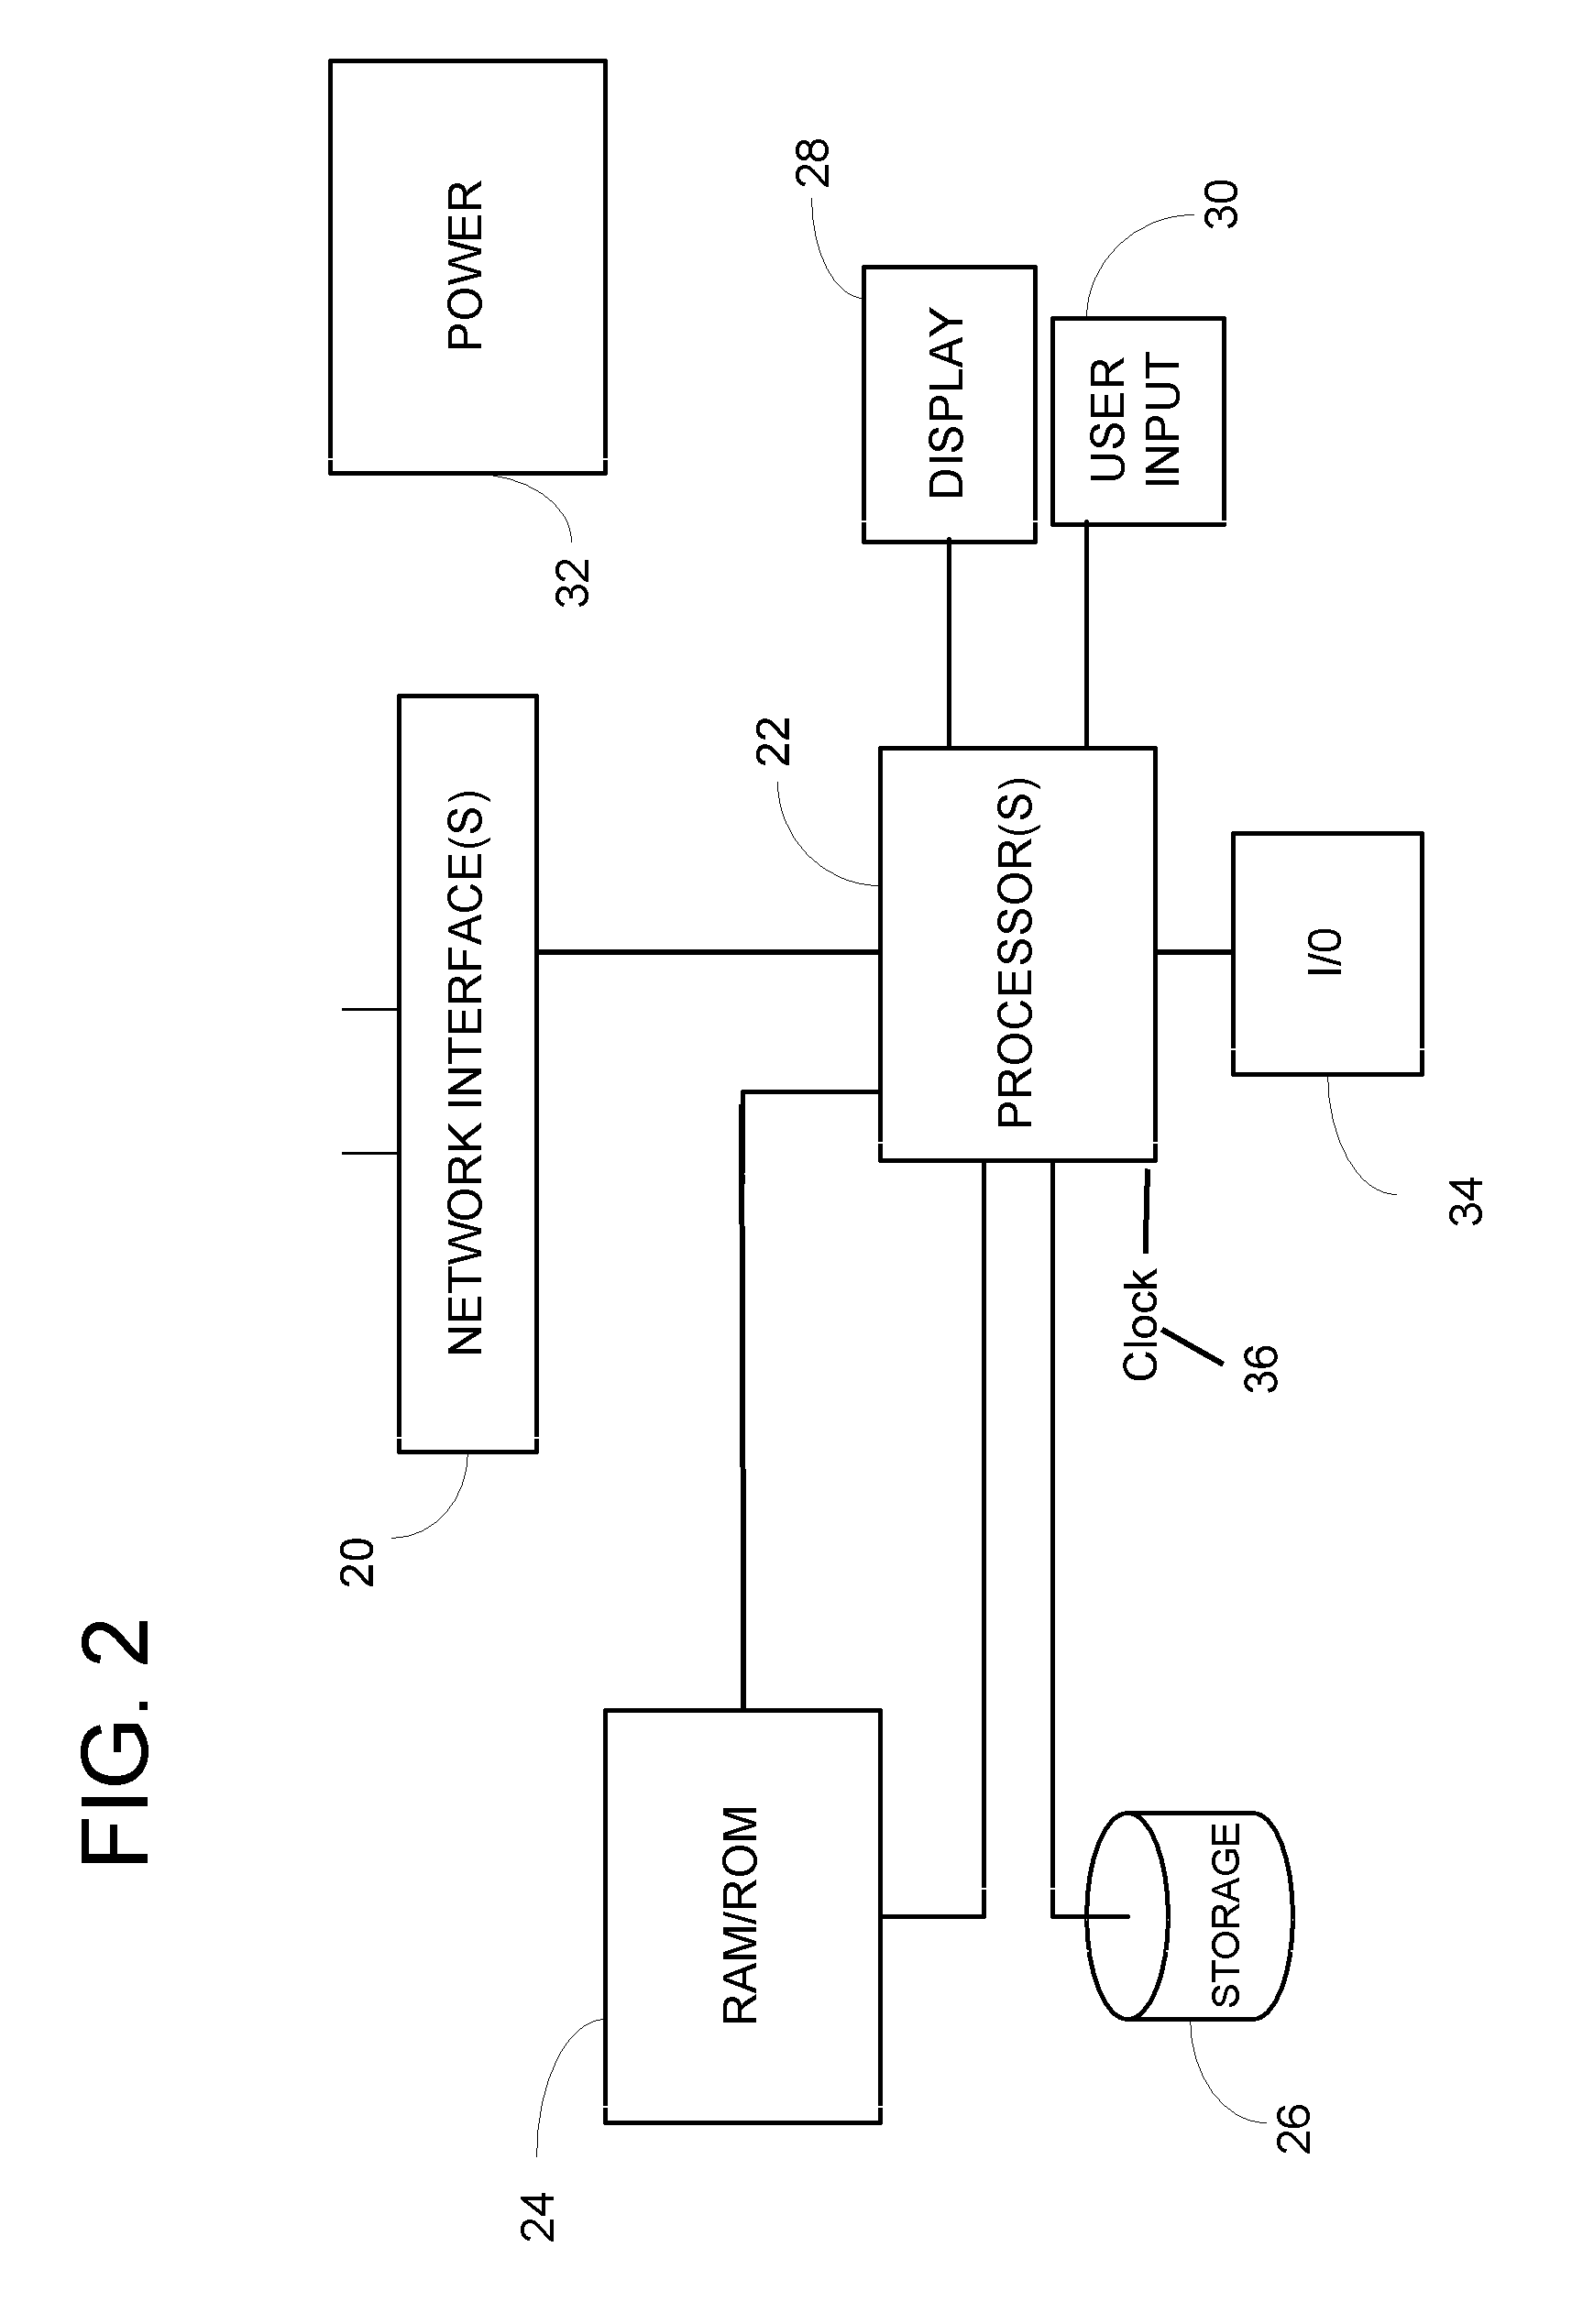 Method and apparatus for measuring directionally differentiated (one-way) network latency